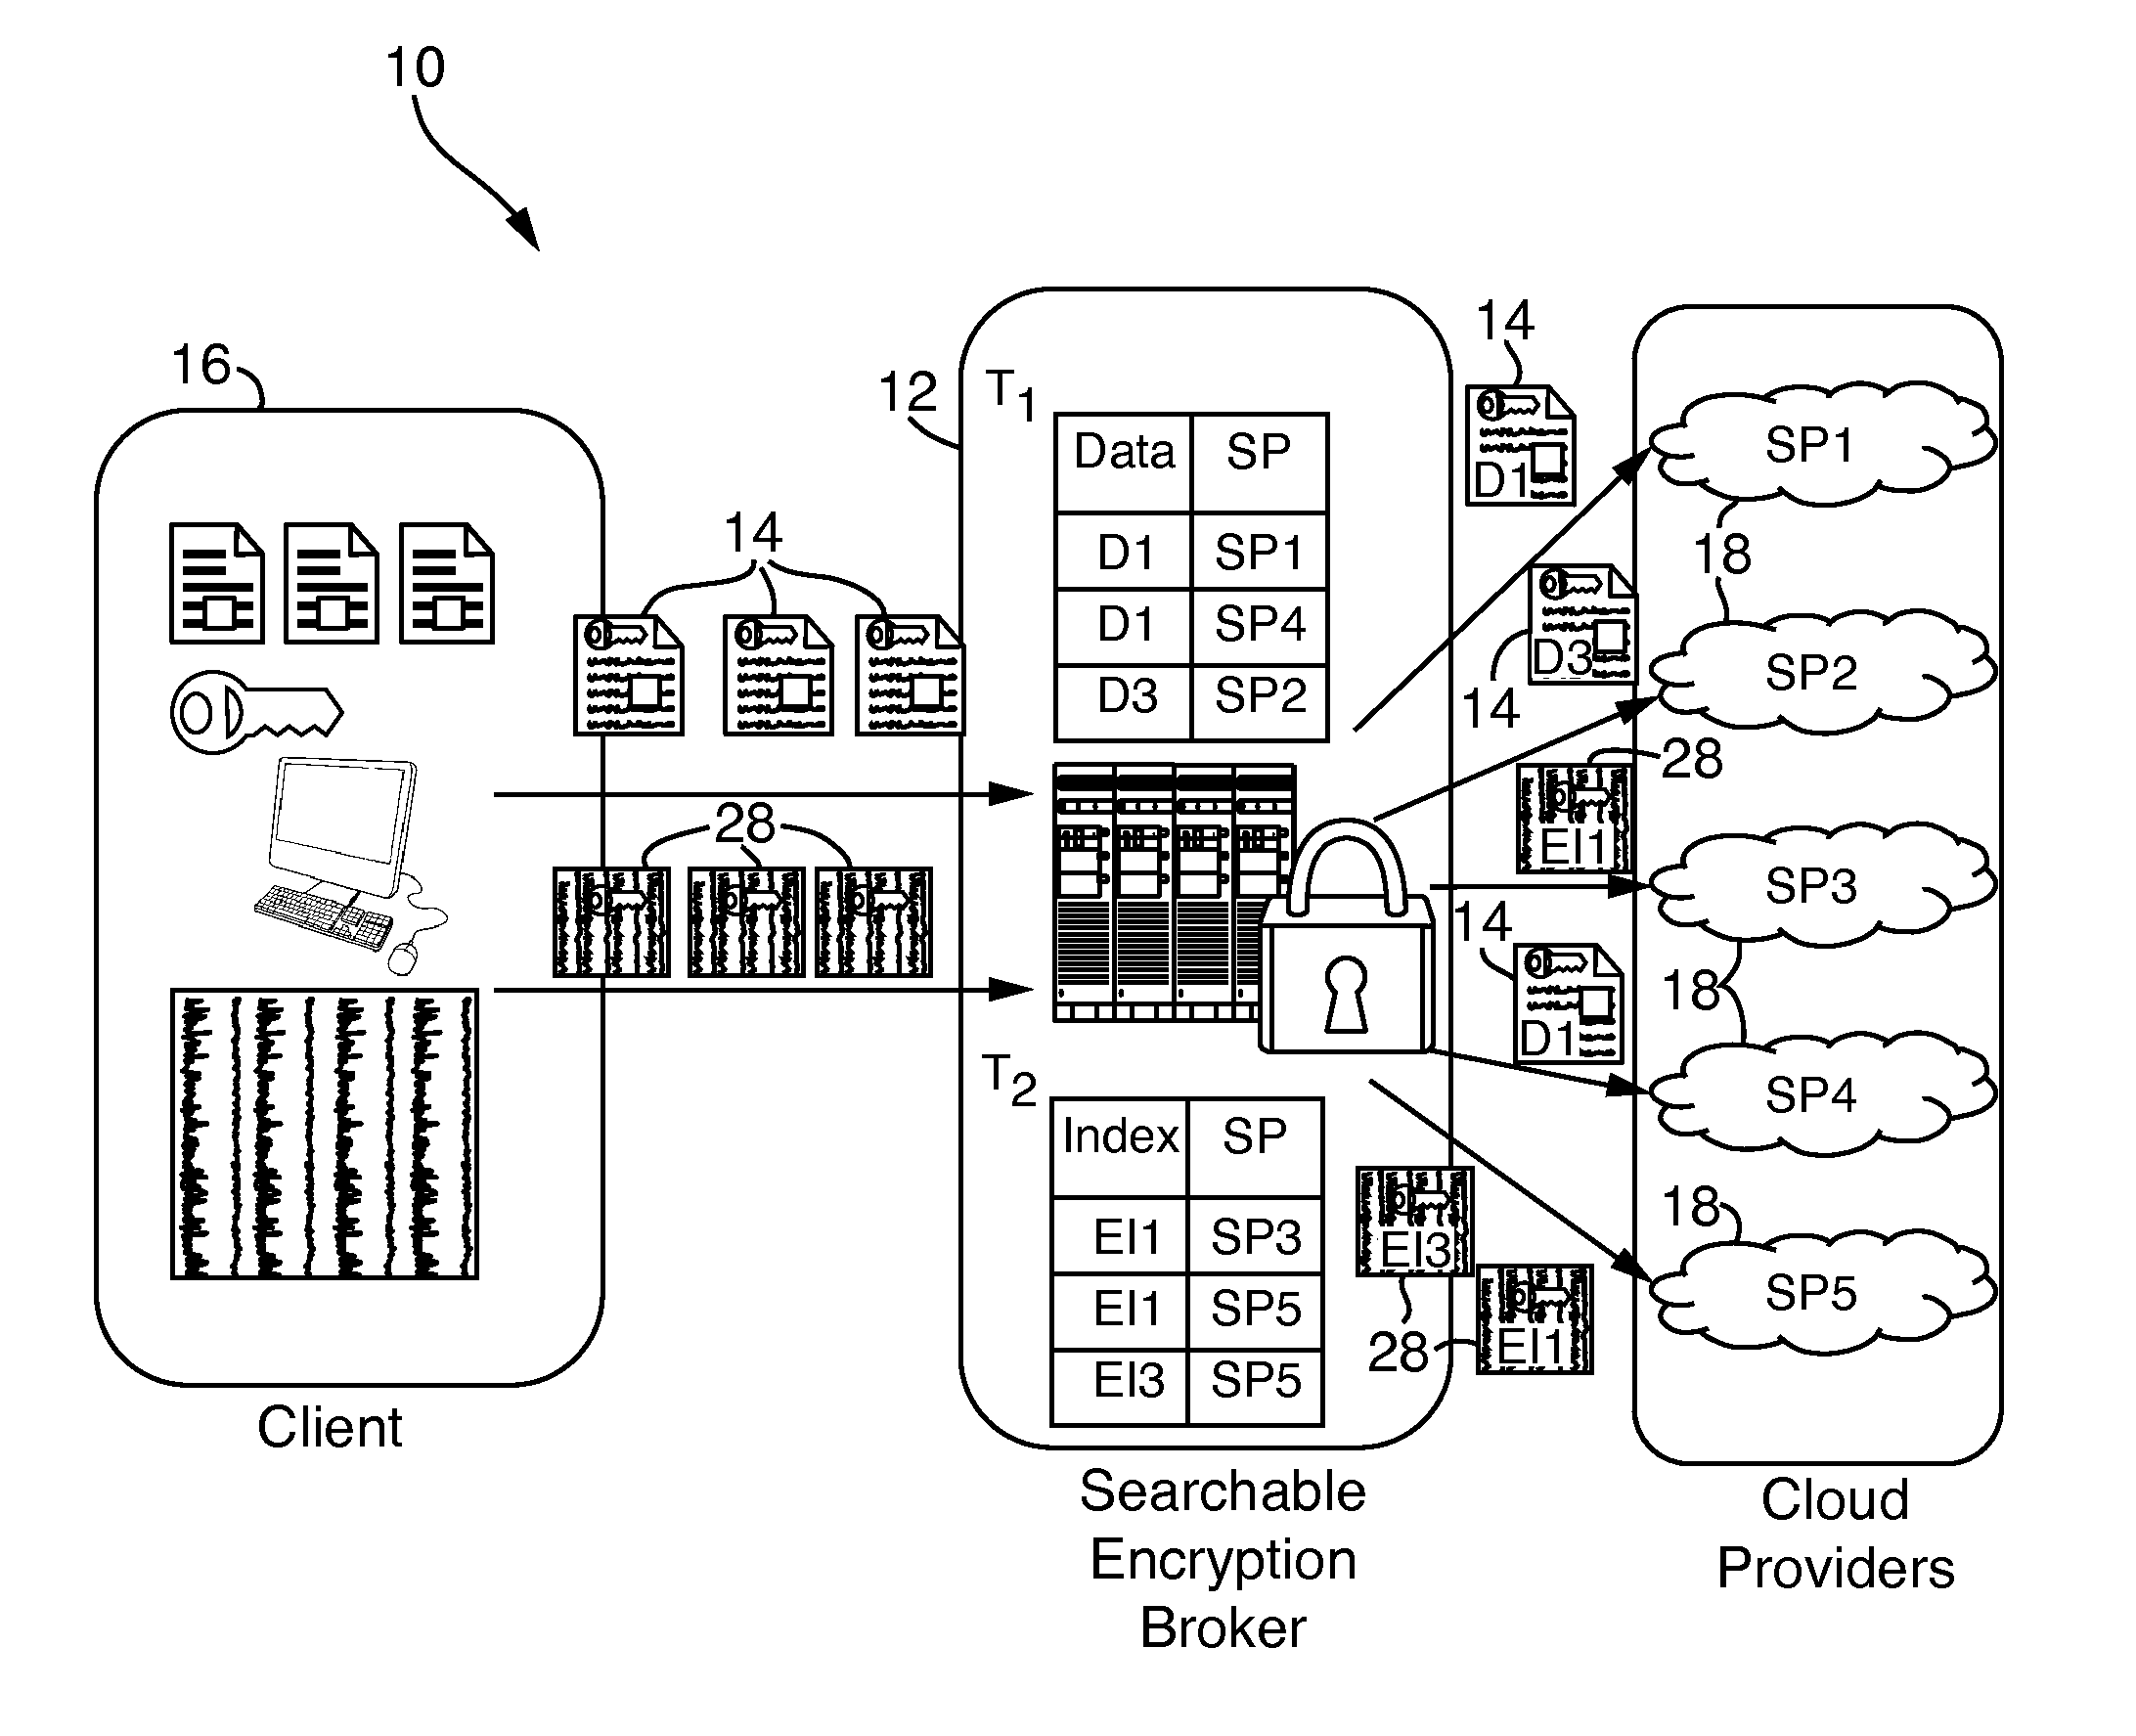 Systems and methods for enabling searchable encryption